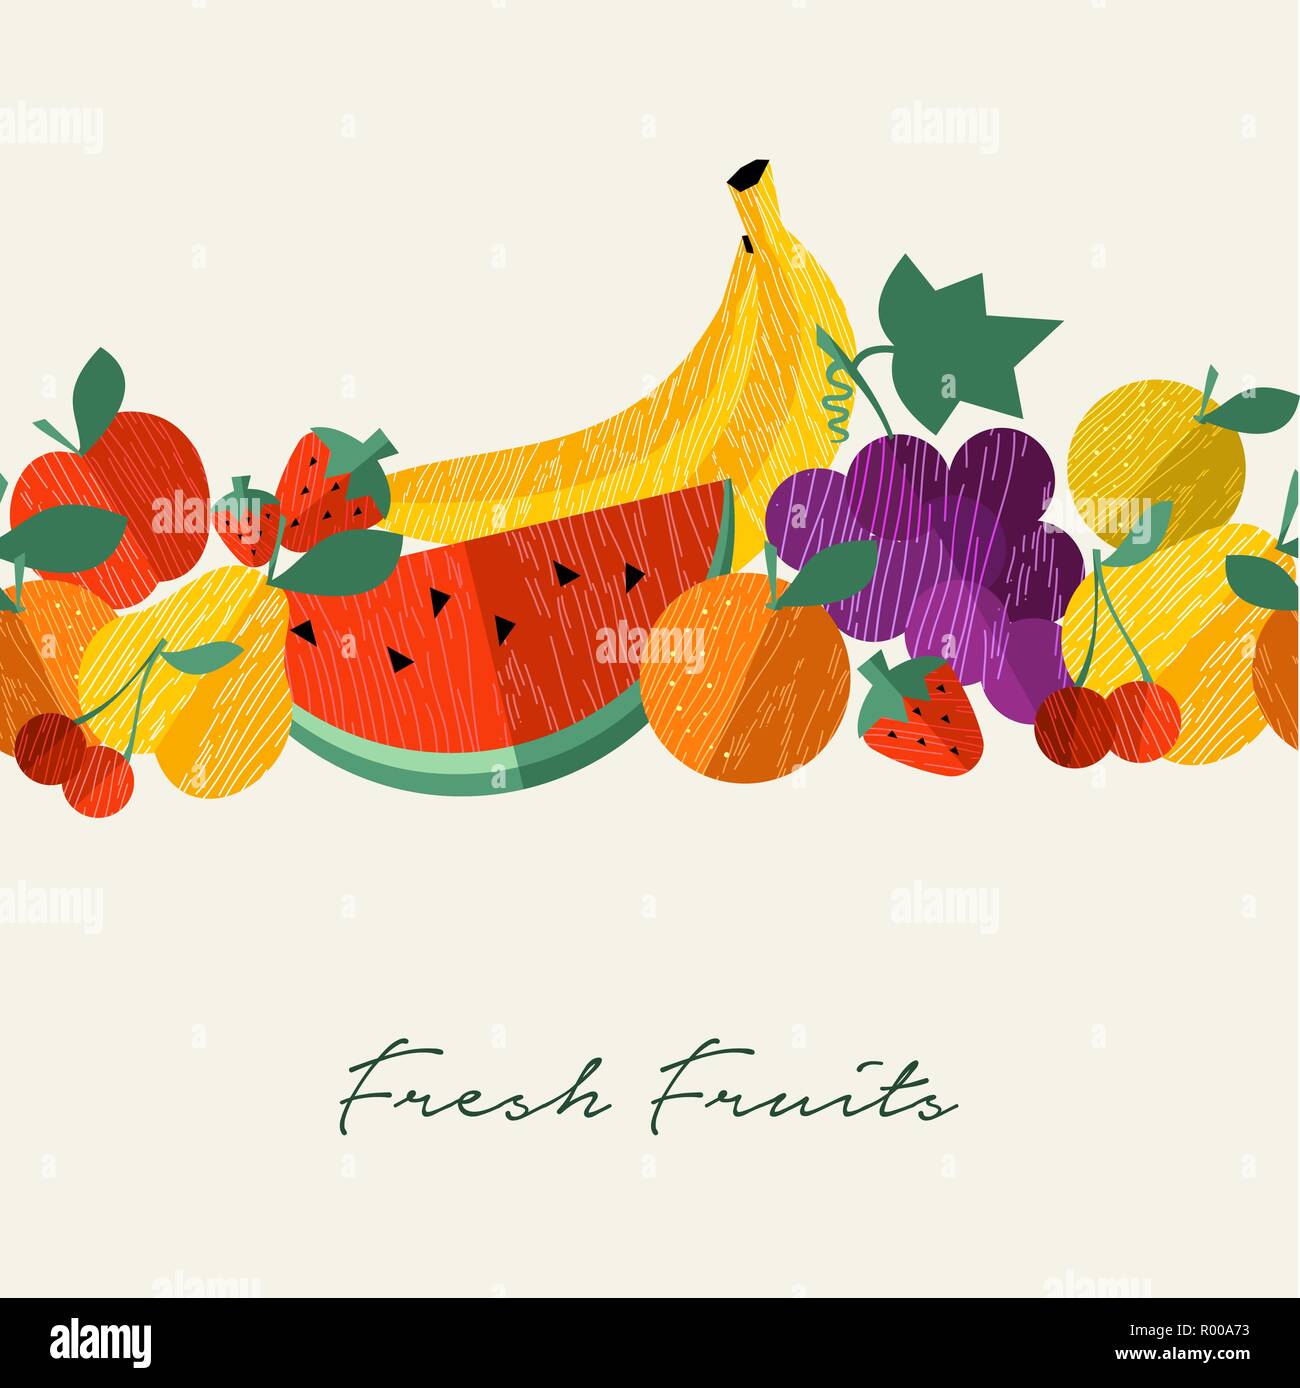 Fresh organic fruits menu illustration background for nutrition and healthy food diet with colorful flat icons. Includes apple, banana, watermelon, or Stock Vector